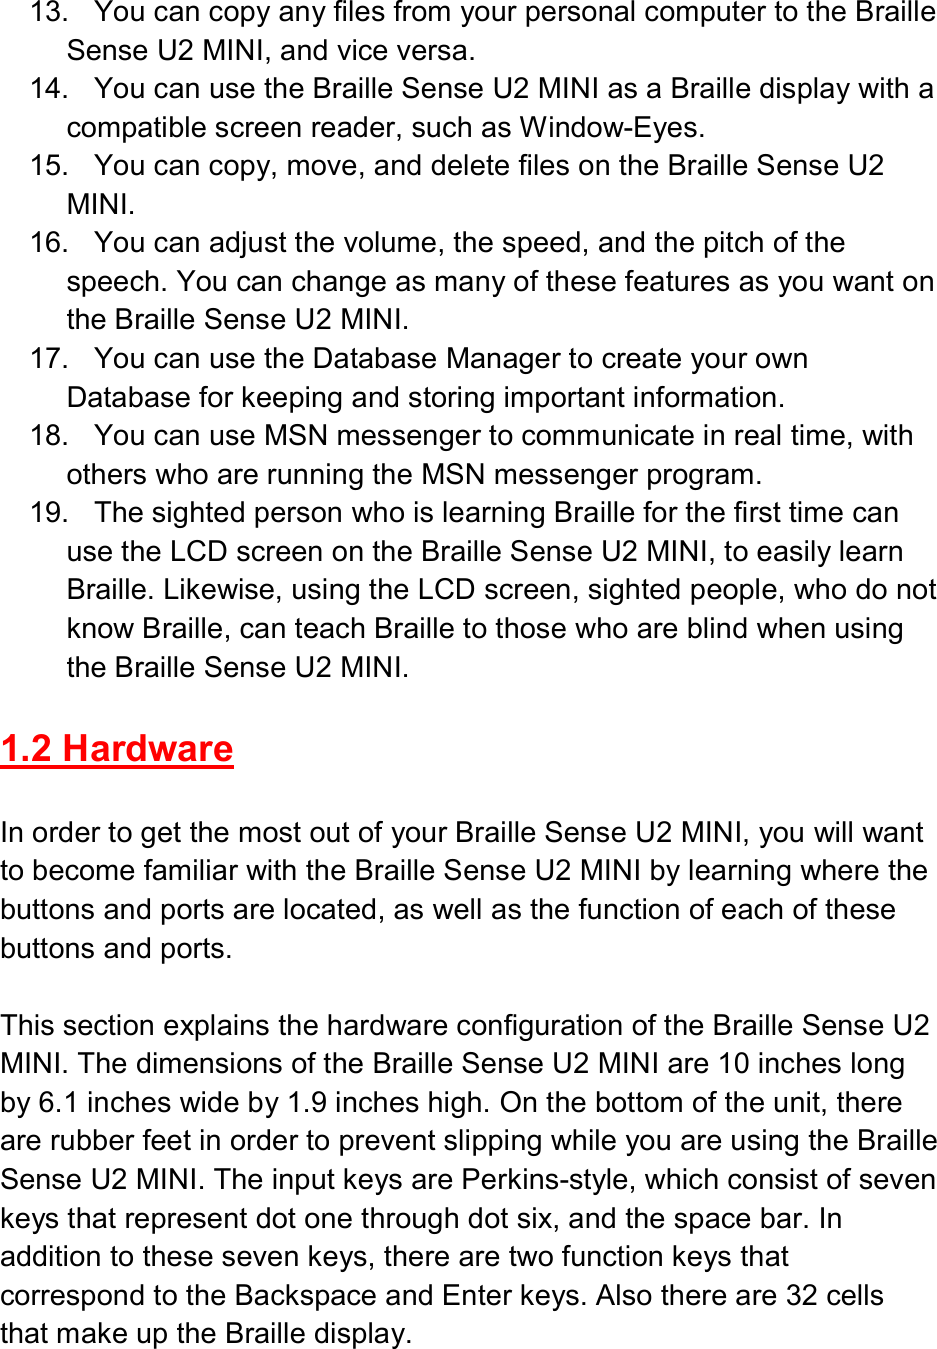  13.  You can copy any files from your personal computer to the Braille Sense U2 MINI, and vice versa. 14.  You can use the Braille Sense U2 MINI as a Braille display with a compatible screen reader, such as Window-Eyes. 15.  You can copy, move, and delete files on the Braille Sense U2 MINI. 16.  You can adjust the volume, the speed, and the pitch of the speech. You can change as many of these features as you want on the Braille Sense U2 MINI. 17.  You can use the Database Manager to create your own Database for keeping and storing important information. 18.  You can use MSN messenger to communicate in real time, with others who are running the MSN messenger program. 19.  The sighted person who is learning Braille for the first time can use the LCD screen on the Braille Sense U2 MINI, to easily learn Braille. Likewise, using the LCD screen, sighted people, who do not know Braille, can teach Braille to those who are blind when using the Braille Sense U2 MINI.  1.2 Hardware  In order to get the most out of your Braille Sense U2 MINI, you will want to become familiar with the Braille Sense U2 MINI by learning where the buttons and ports are located, as well as the function of each of these buttons and ports.  This section explains the hardware configuration of the Braille Sense U2 MINI. The dimensions of the Braille Sense U2 MINI are 10 inches long by 6.1 inches wide by 1.9 inches high. On the bottom of the unit, there are rubber feet in order to prevent slipping while you are using the Braille Sense U2 MINI. The input keys are Perkins-style, which consist of seven keys that represent dot one through dot six, and the space bar. In addition to these seven keys, there are two function keys that correspond to the Backspace and Enter keys. Also there are 32 cells that make up the Braille display.  